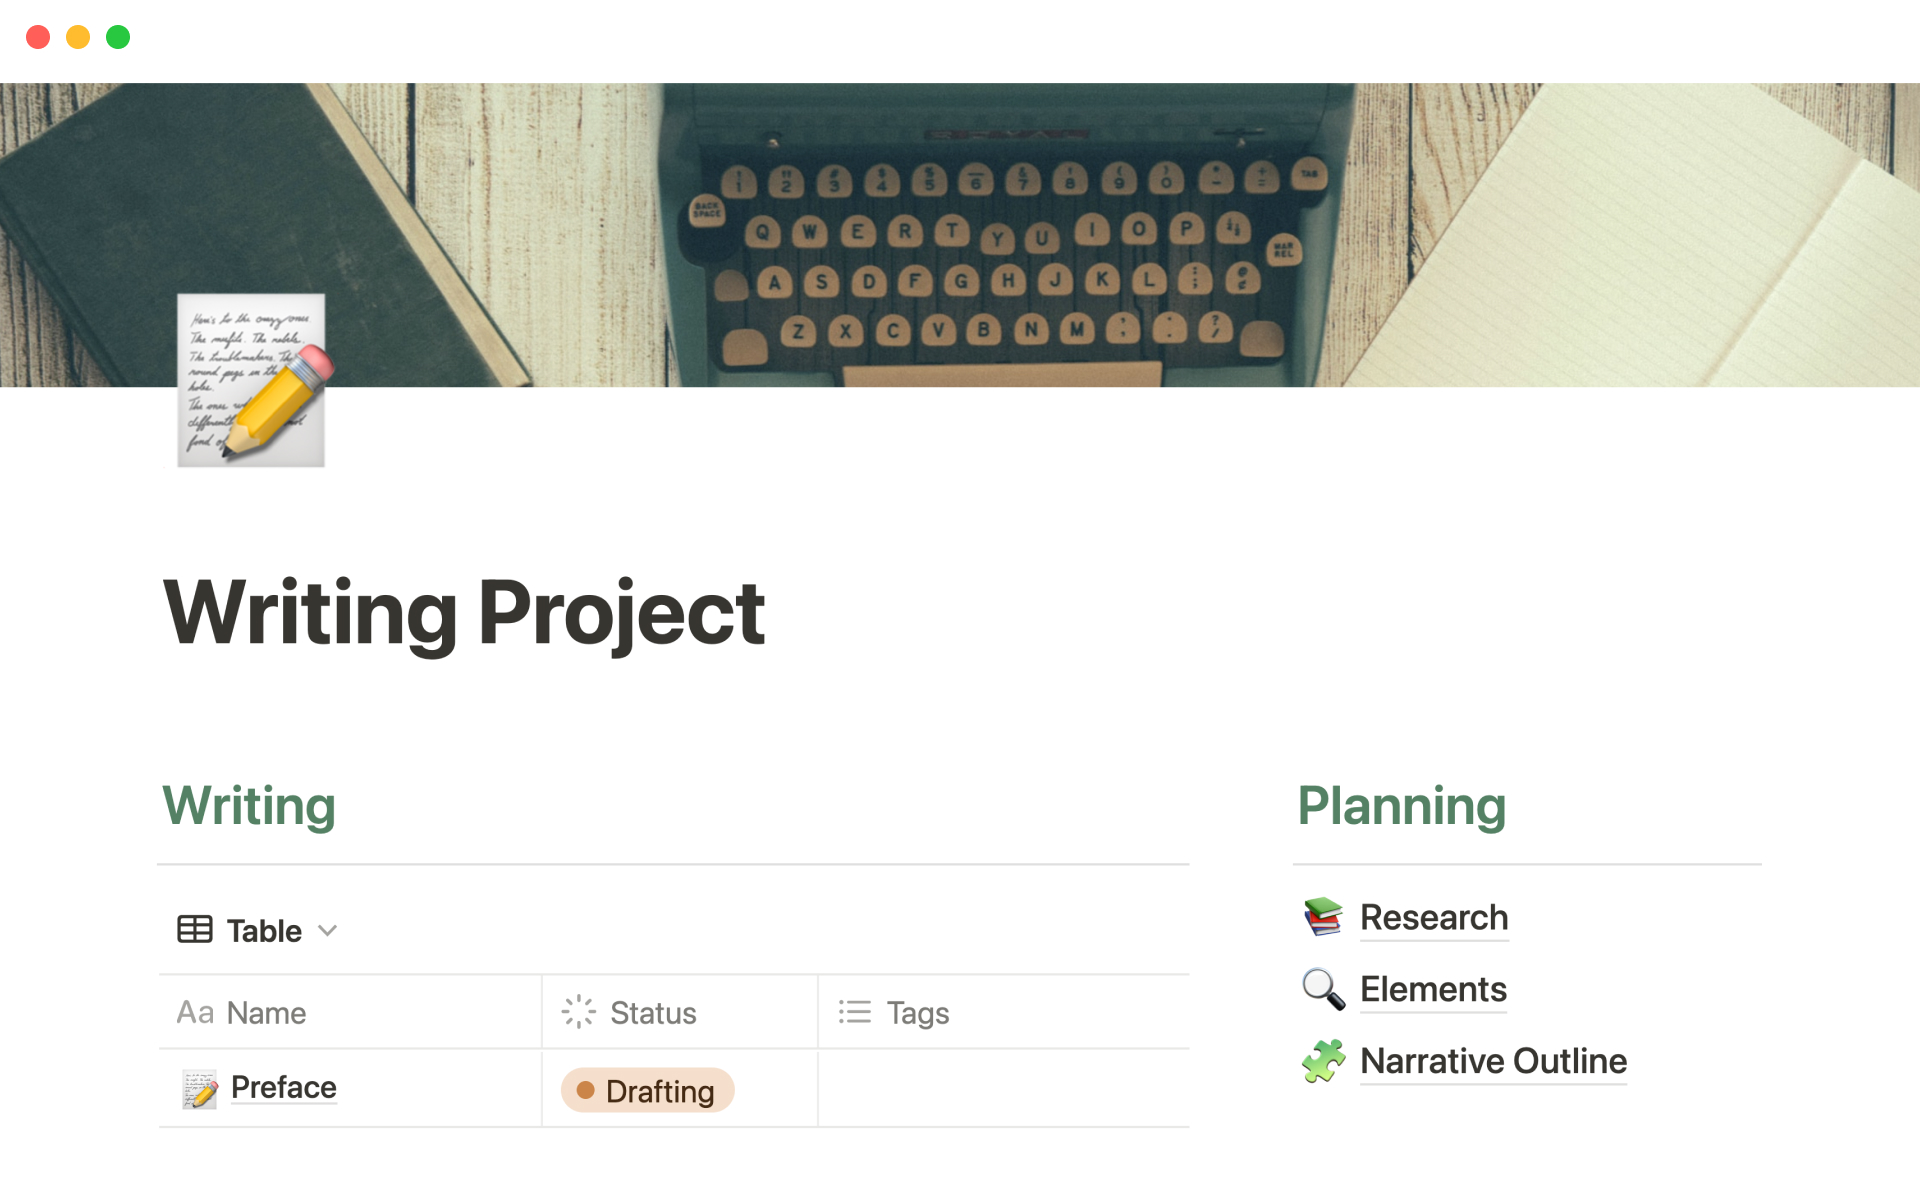 Organize and plan your writing projects, so you can focus on creating your best work.